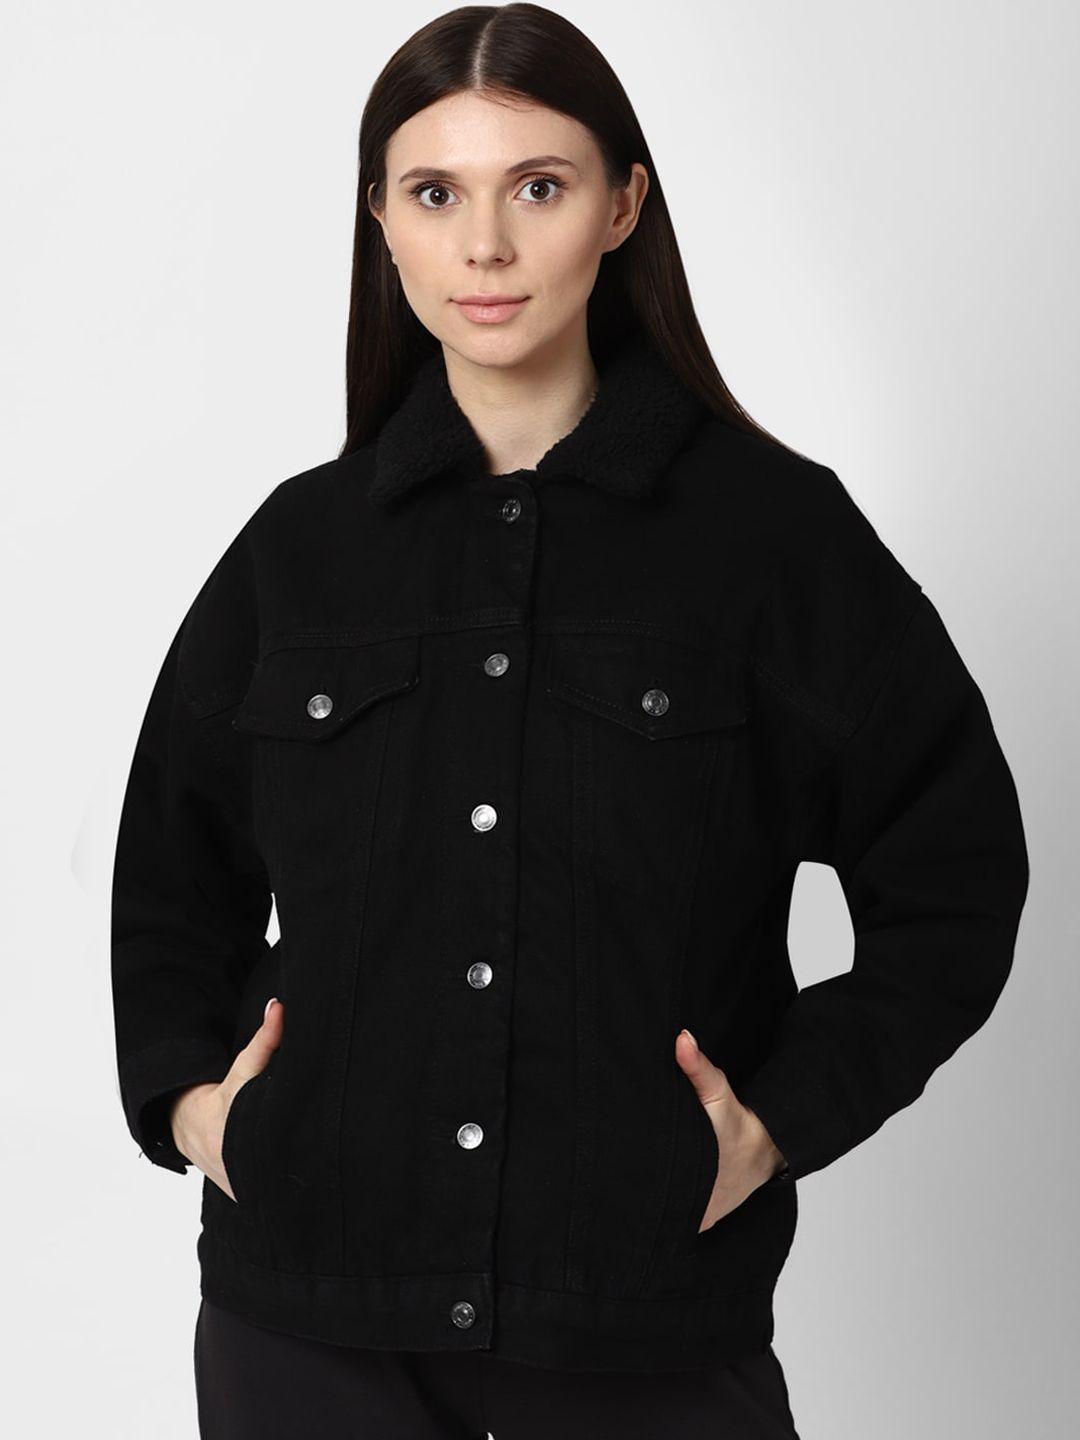 forever 21 women black denim jacket with embroidered